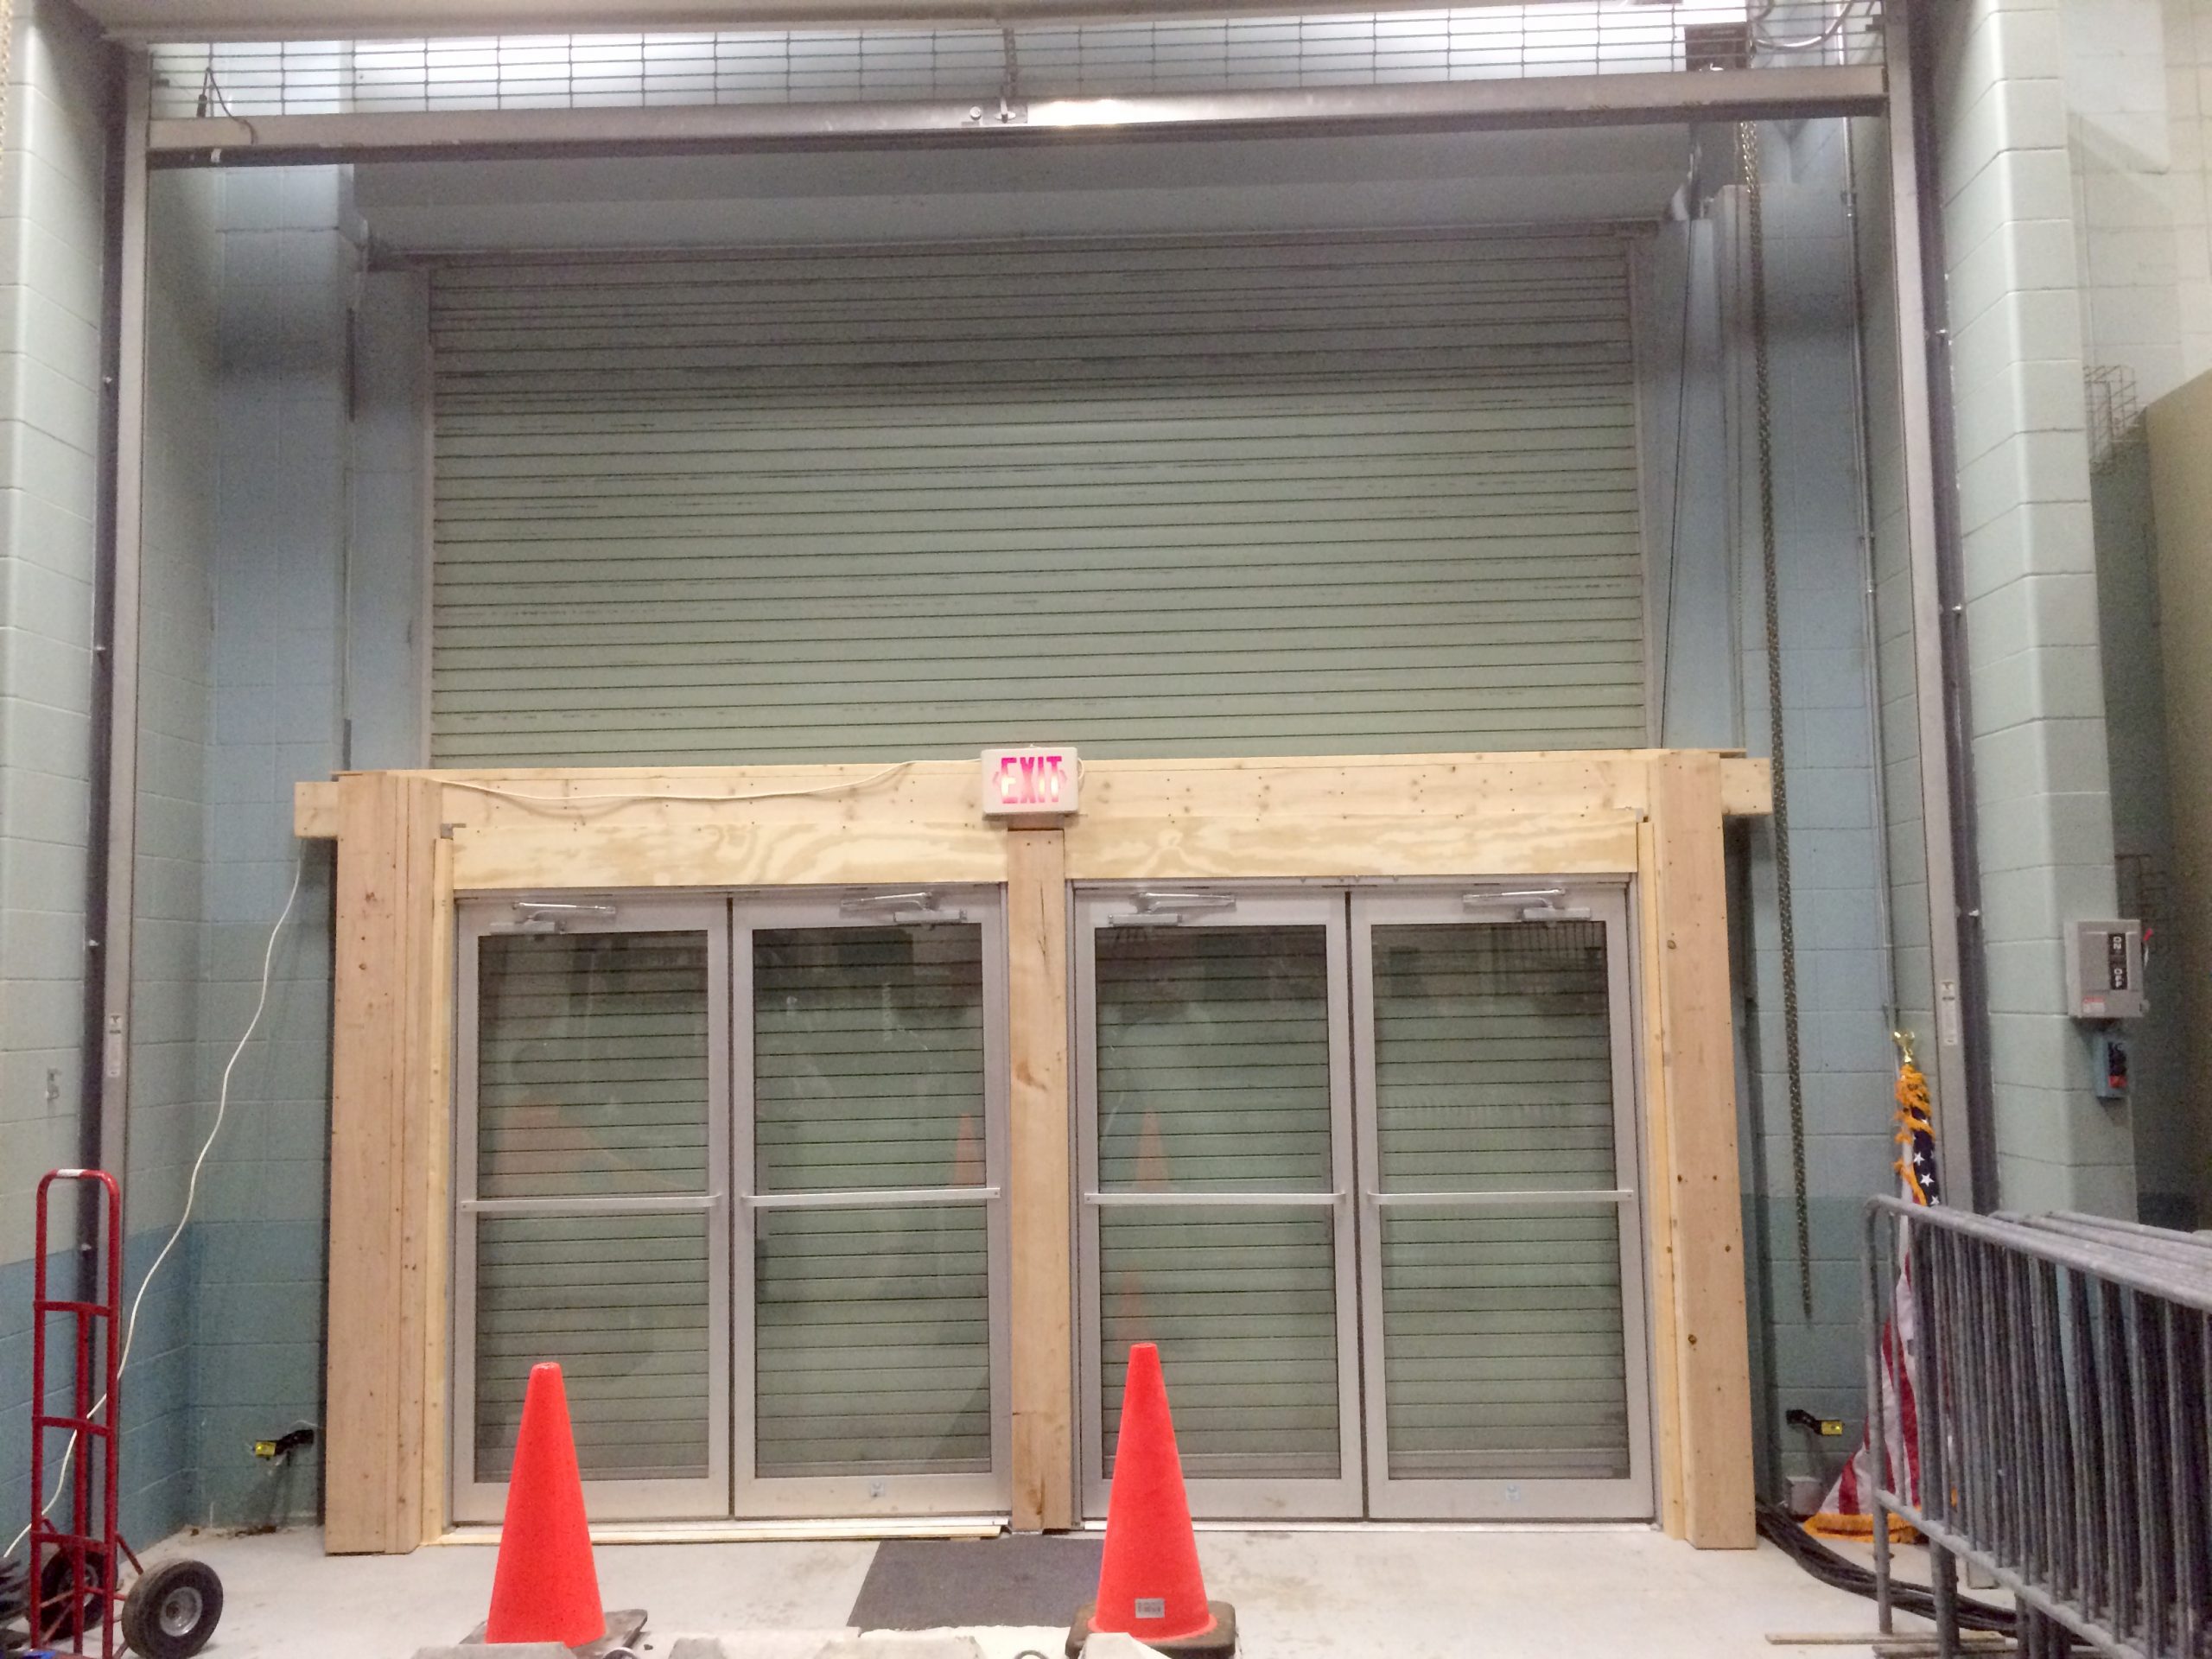 Temporary double glass door fire exits to increase event hall capacity